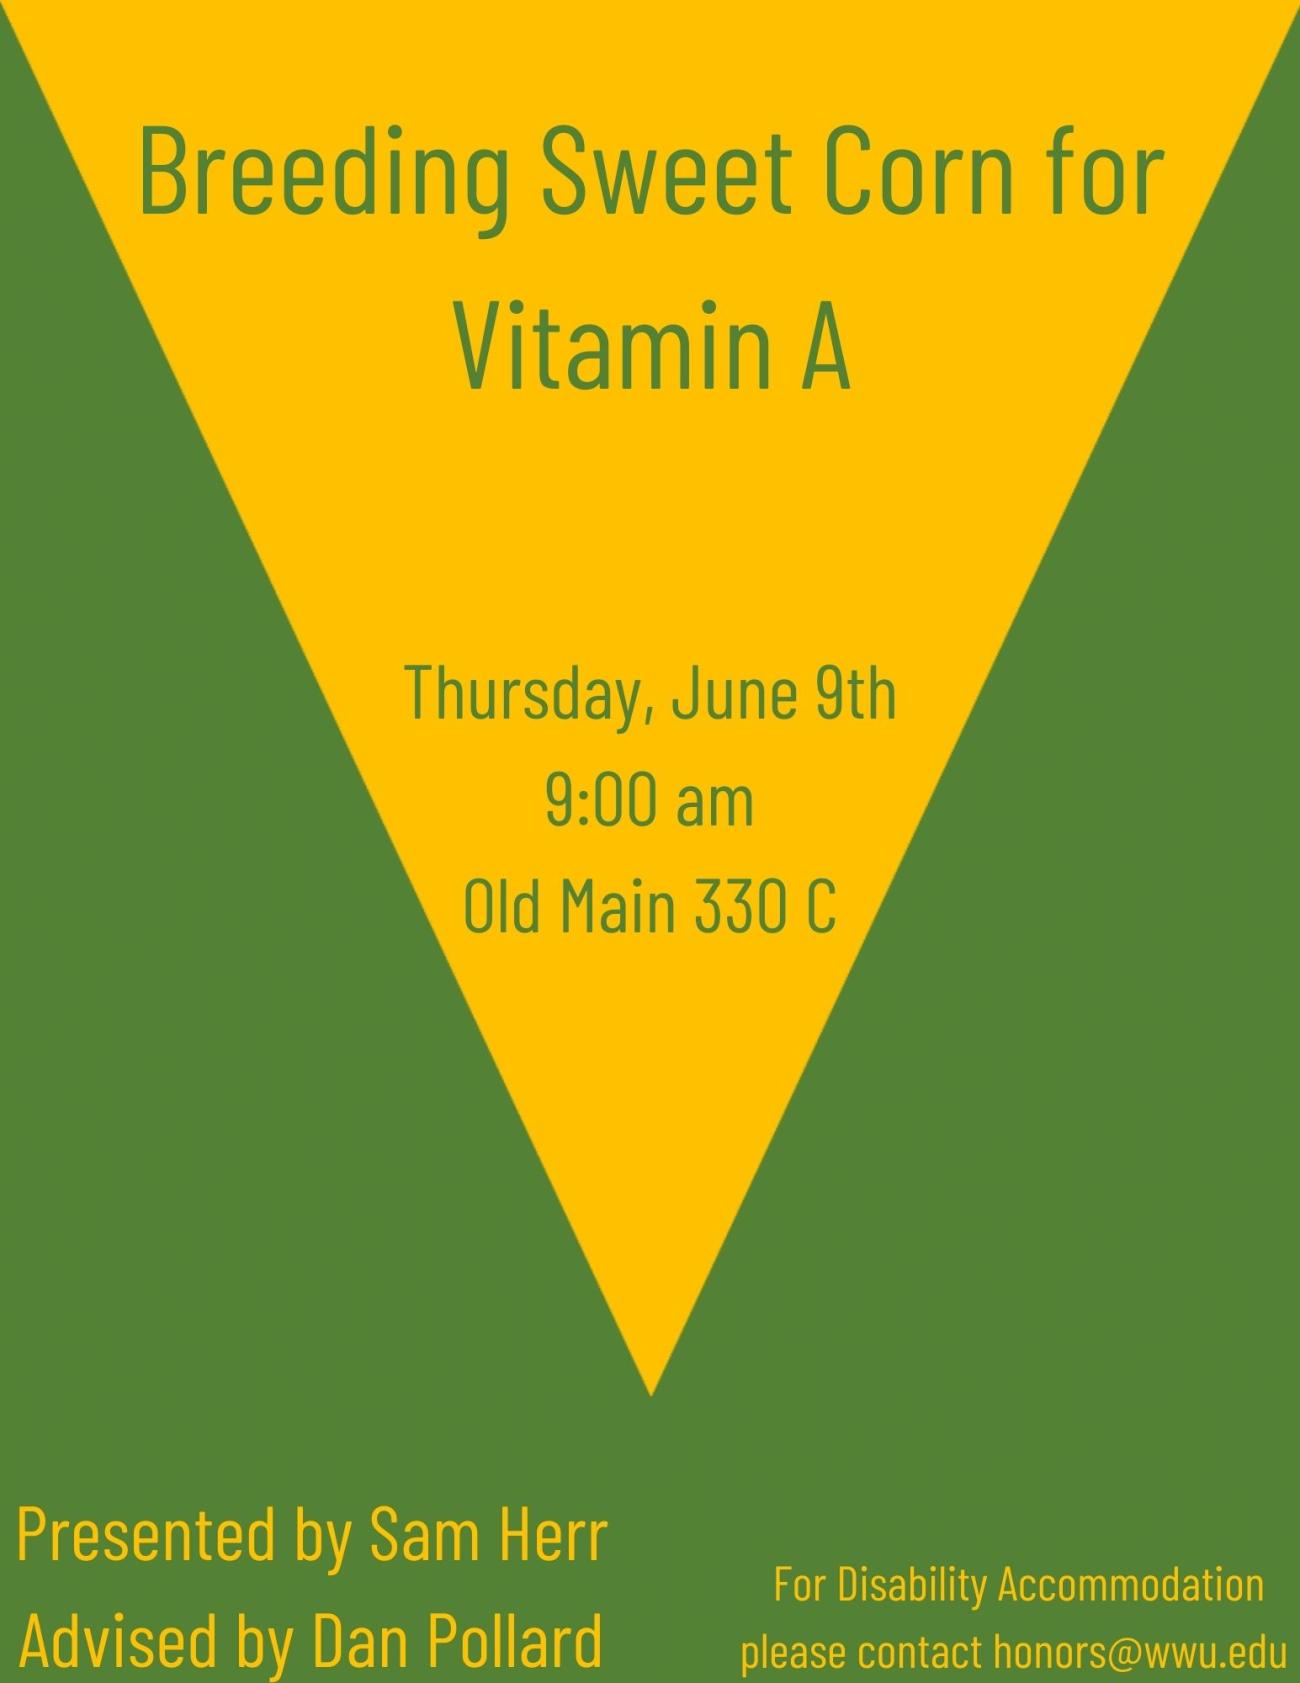 A poster with yellow/gold and green triangles that represent corn. The text reads: "Breeding Sweet Corn for Vitamin A. Thursday June 9th, 9:00 am. Old Main 330C. Presented by Sam Herr, Advised by Dan Pollard. For Disability Accommodation please contact honors@wwu.edu."